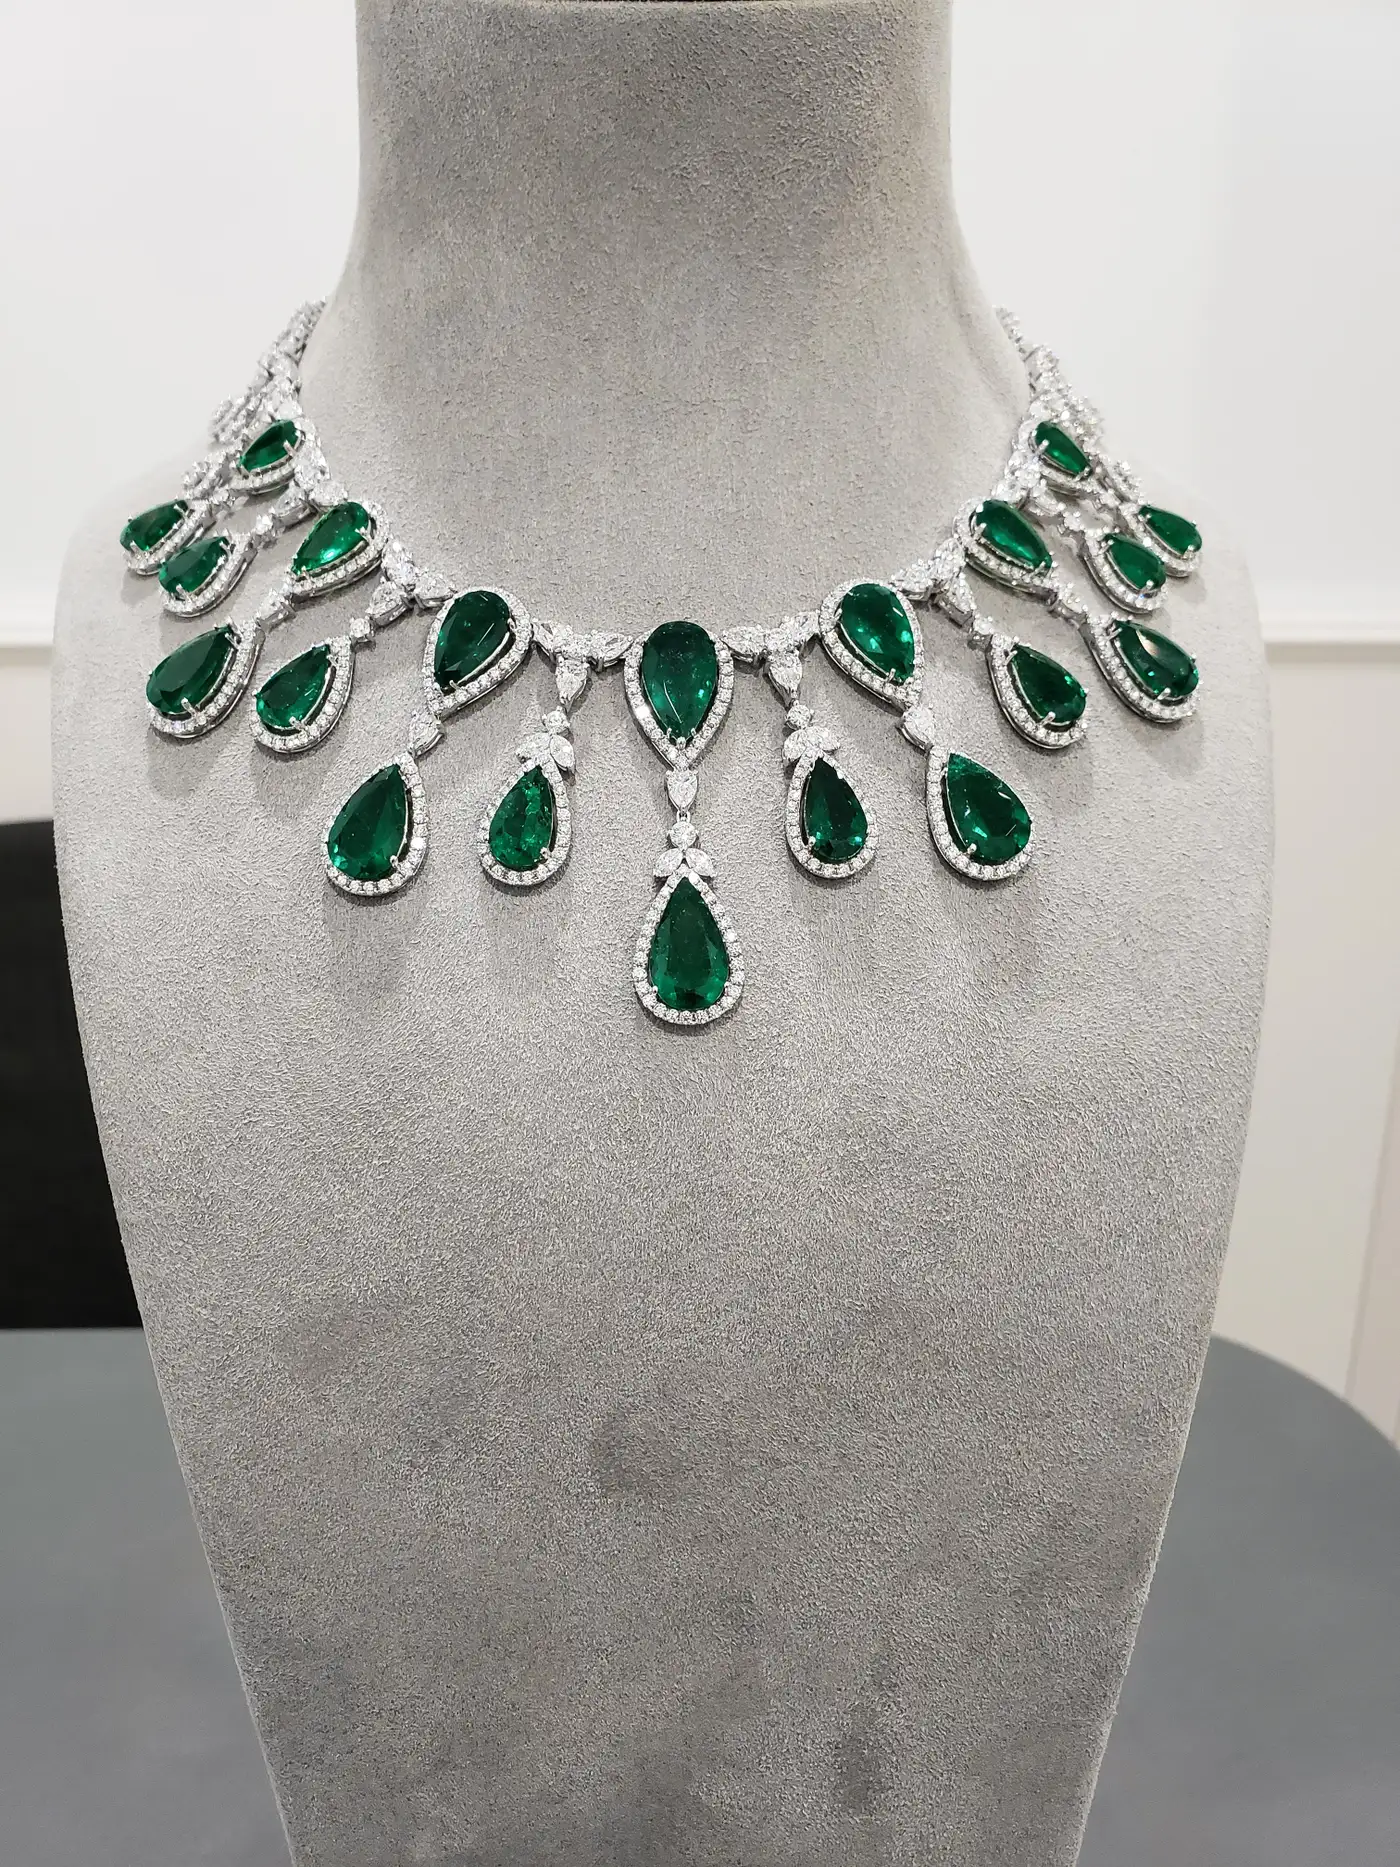 63.40-Carats-Total-Pear-Shape-Colombian-Green-Emerald-and-Diamond-Necklace-5.webp